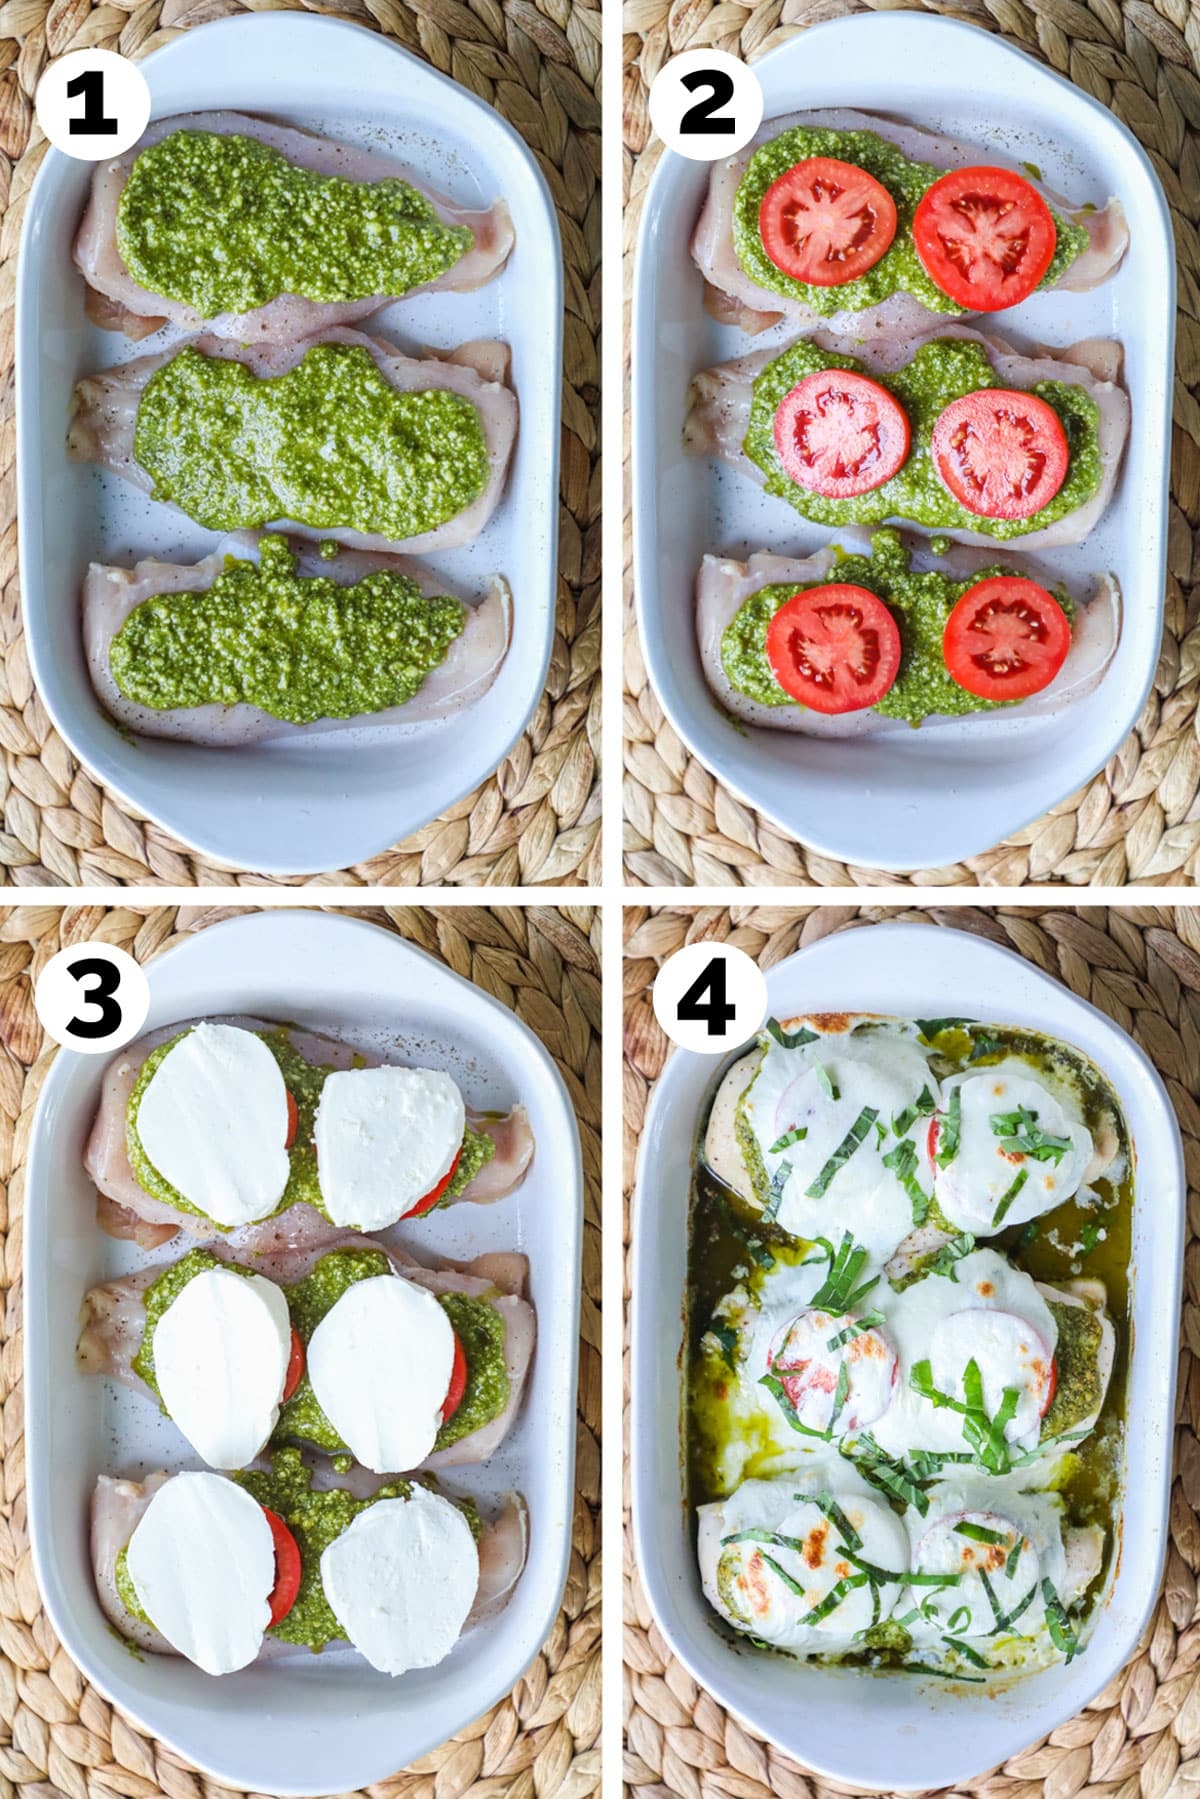 process photos for how to make caprese chicken: 1. Spread basil pesto over the chicken breast. 2. layer on sliced tomato. 3. Add sliced fresh mozzarella cheese. 4. Bake, then garnish with fresh basil